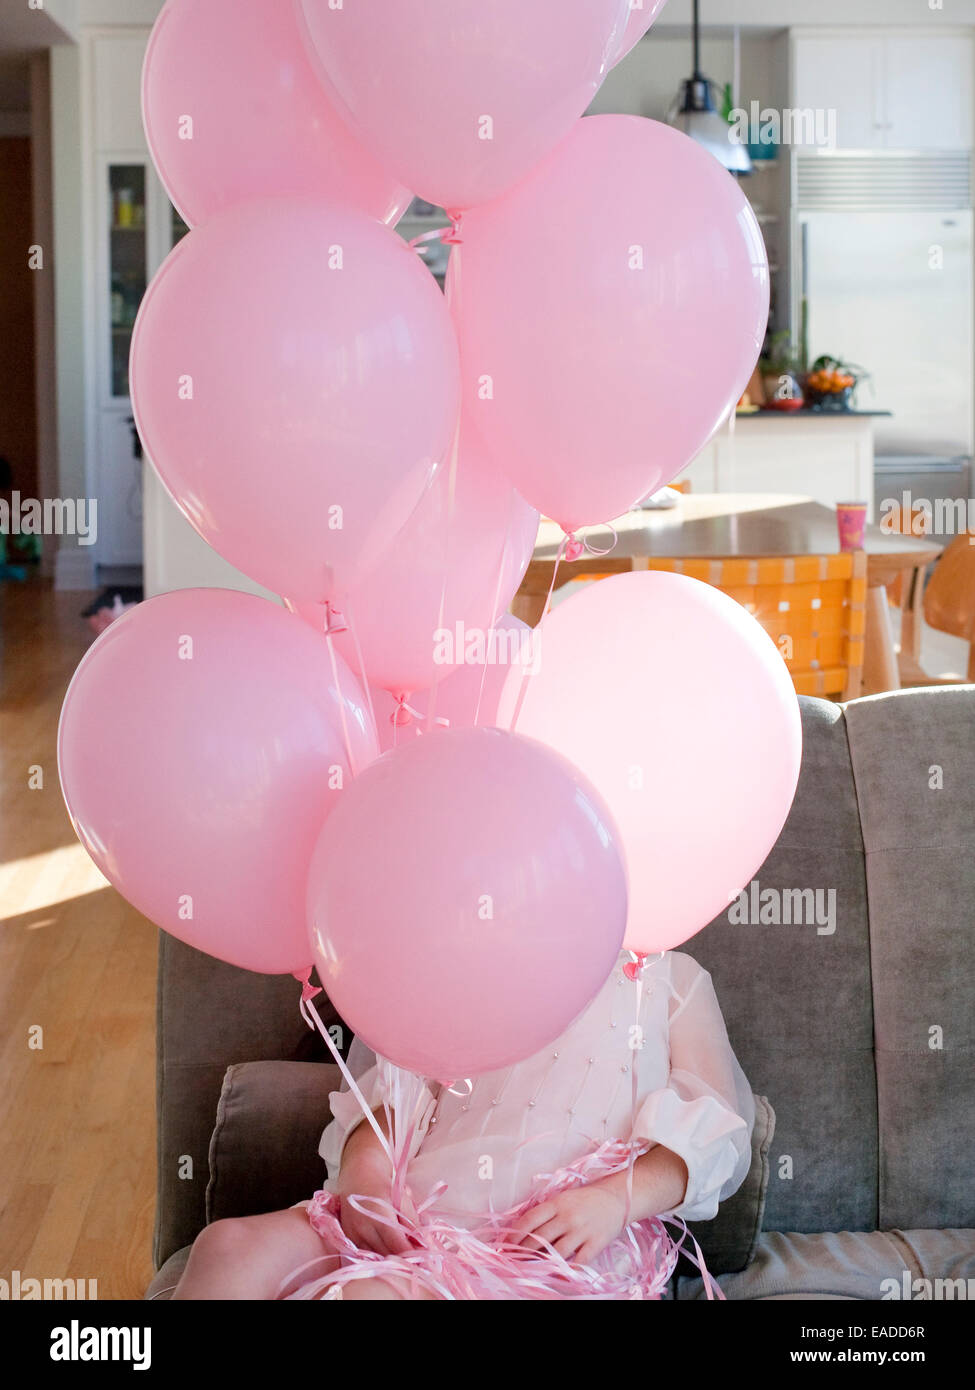 girl in pink party dress holding pink balloons Stock Photo